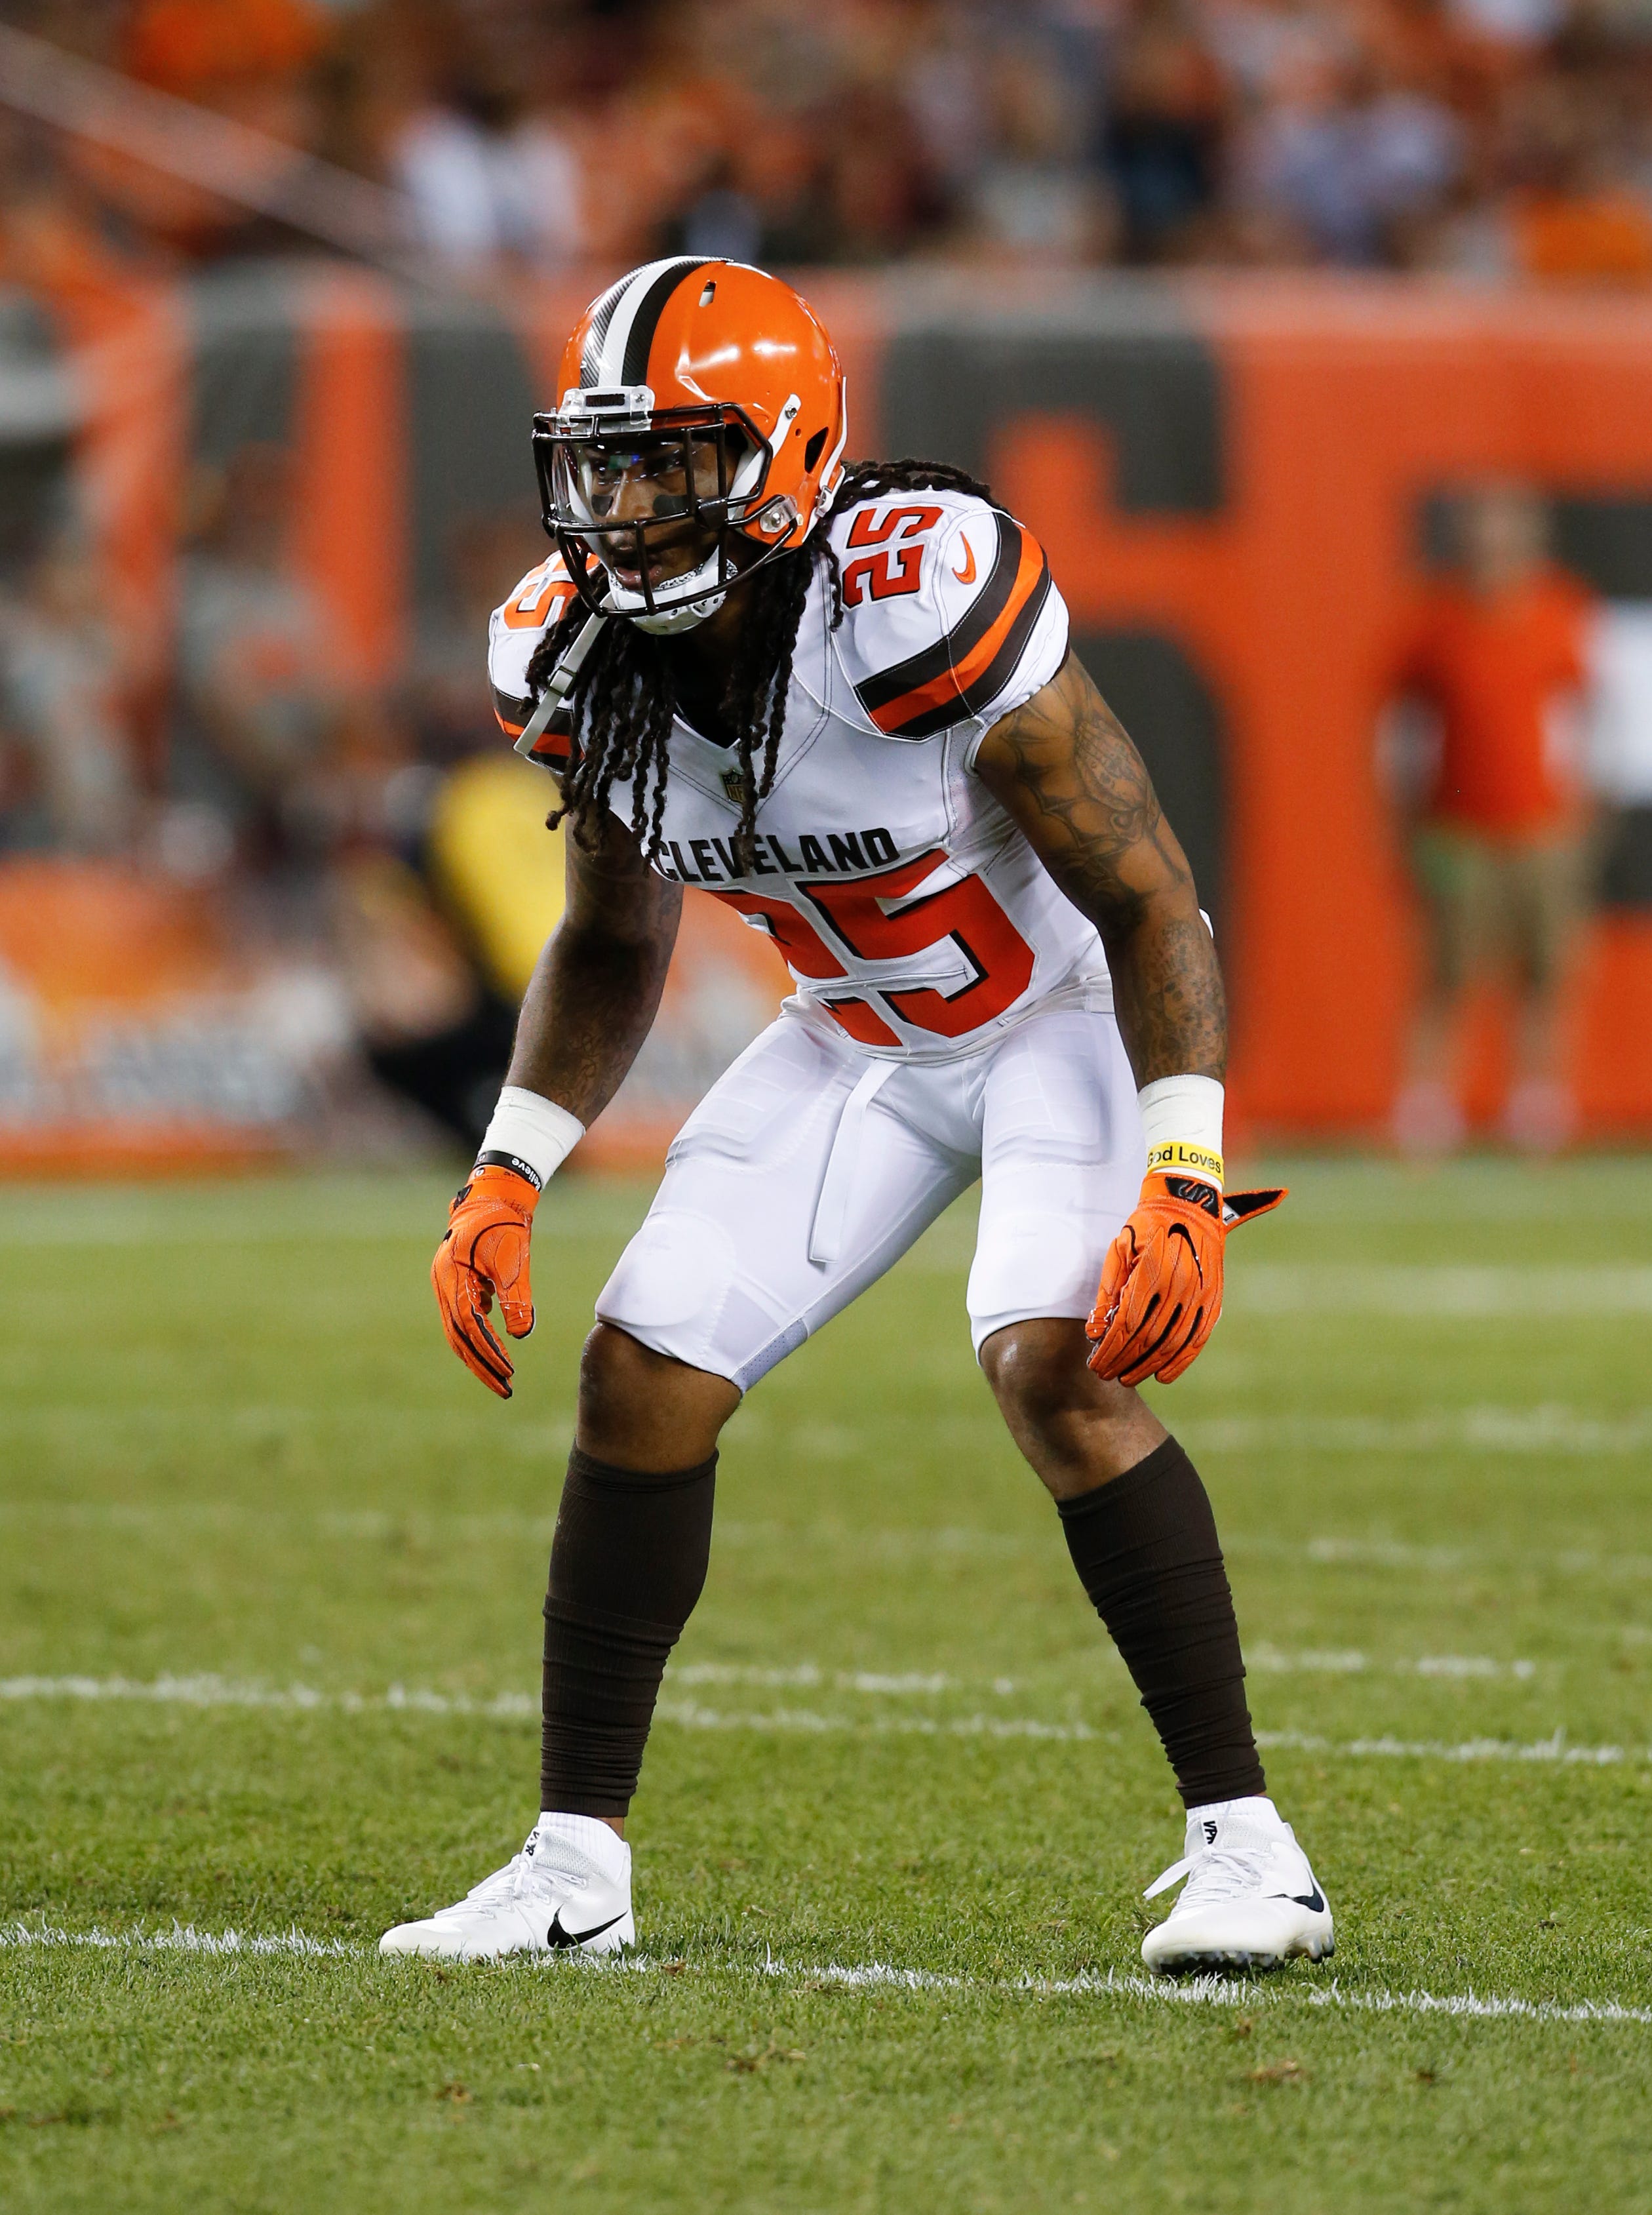 Cleveland Browns release safety Calvin Pryor due to fight with teammate, per report